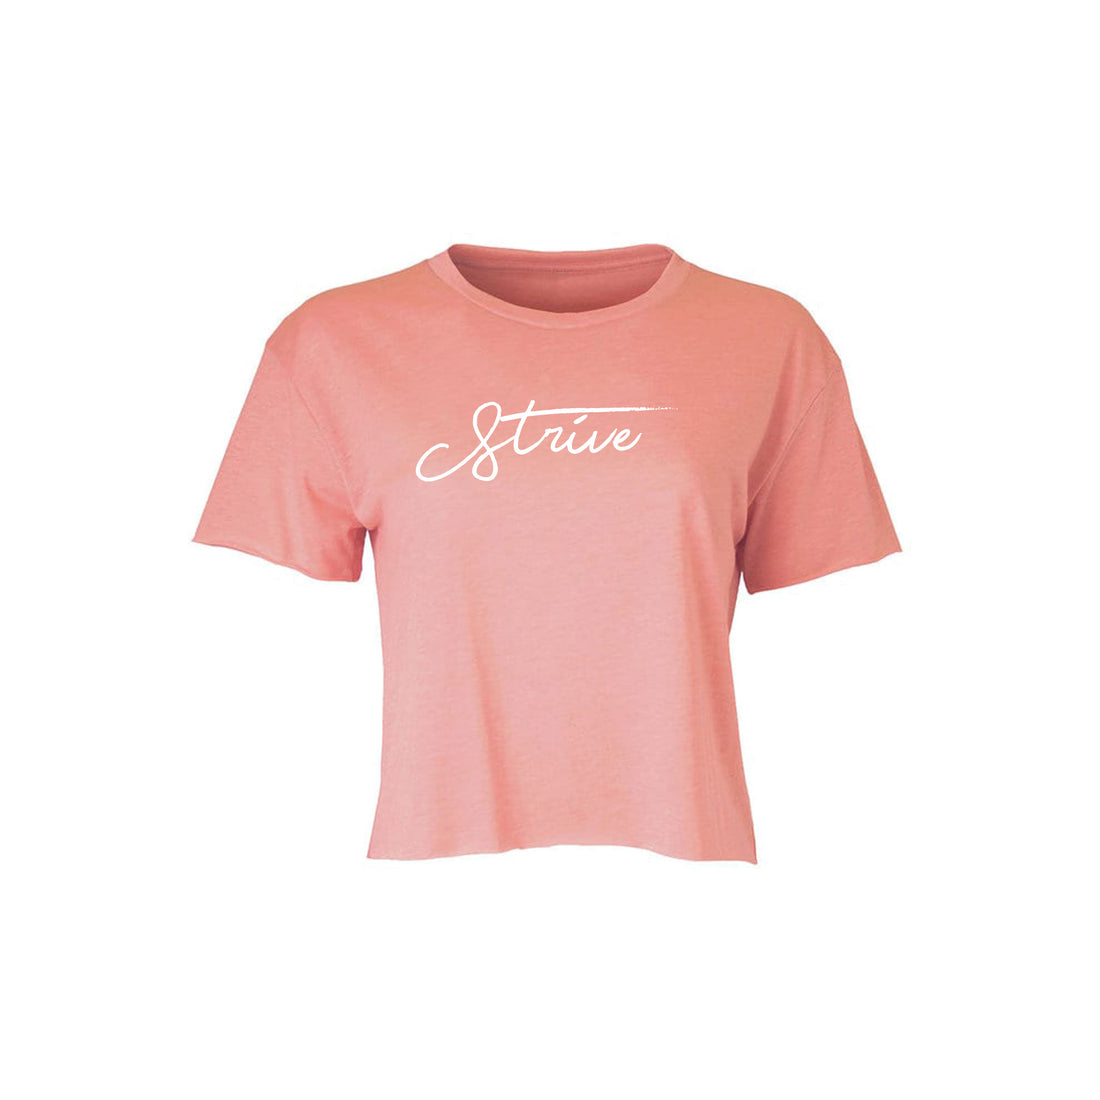 STEM Women's Daily Crop Top - STEM Clothing Group